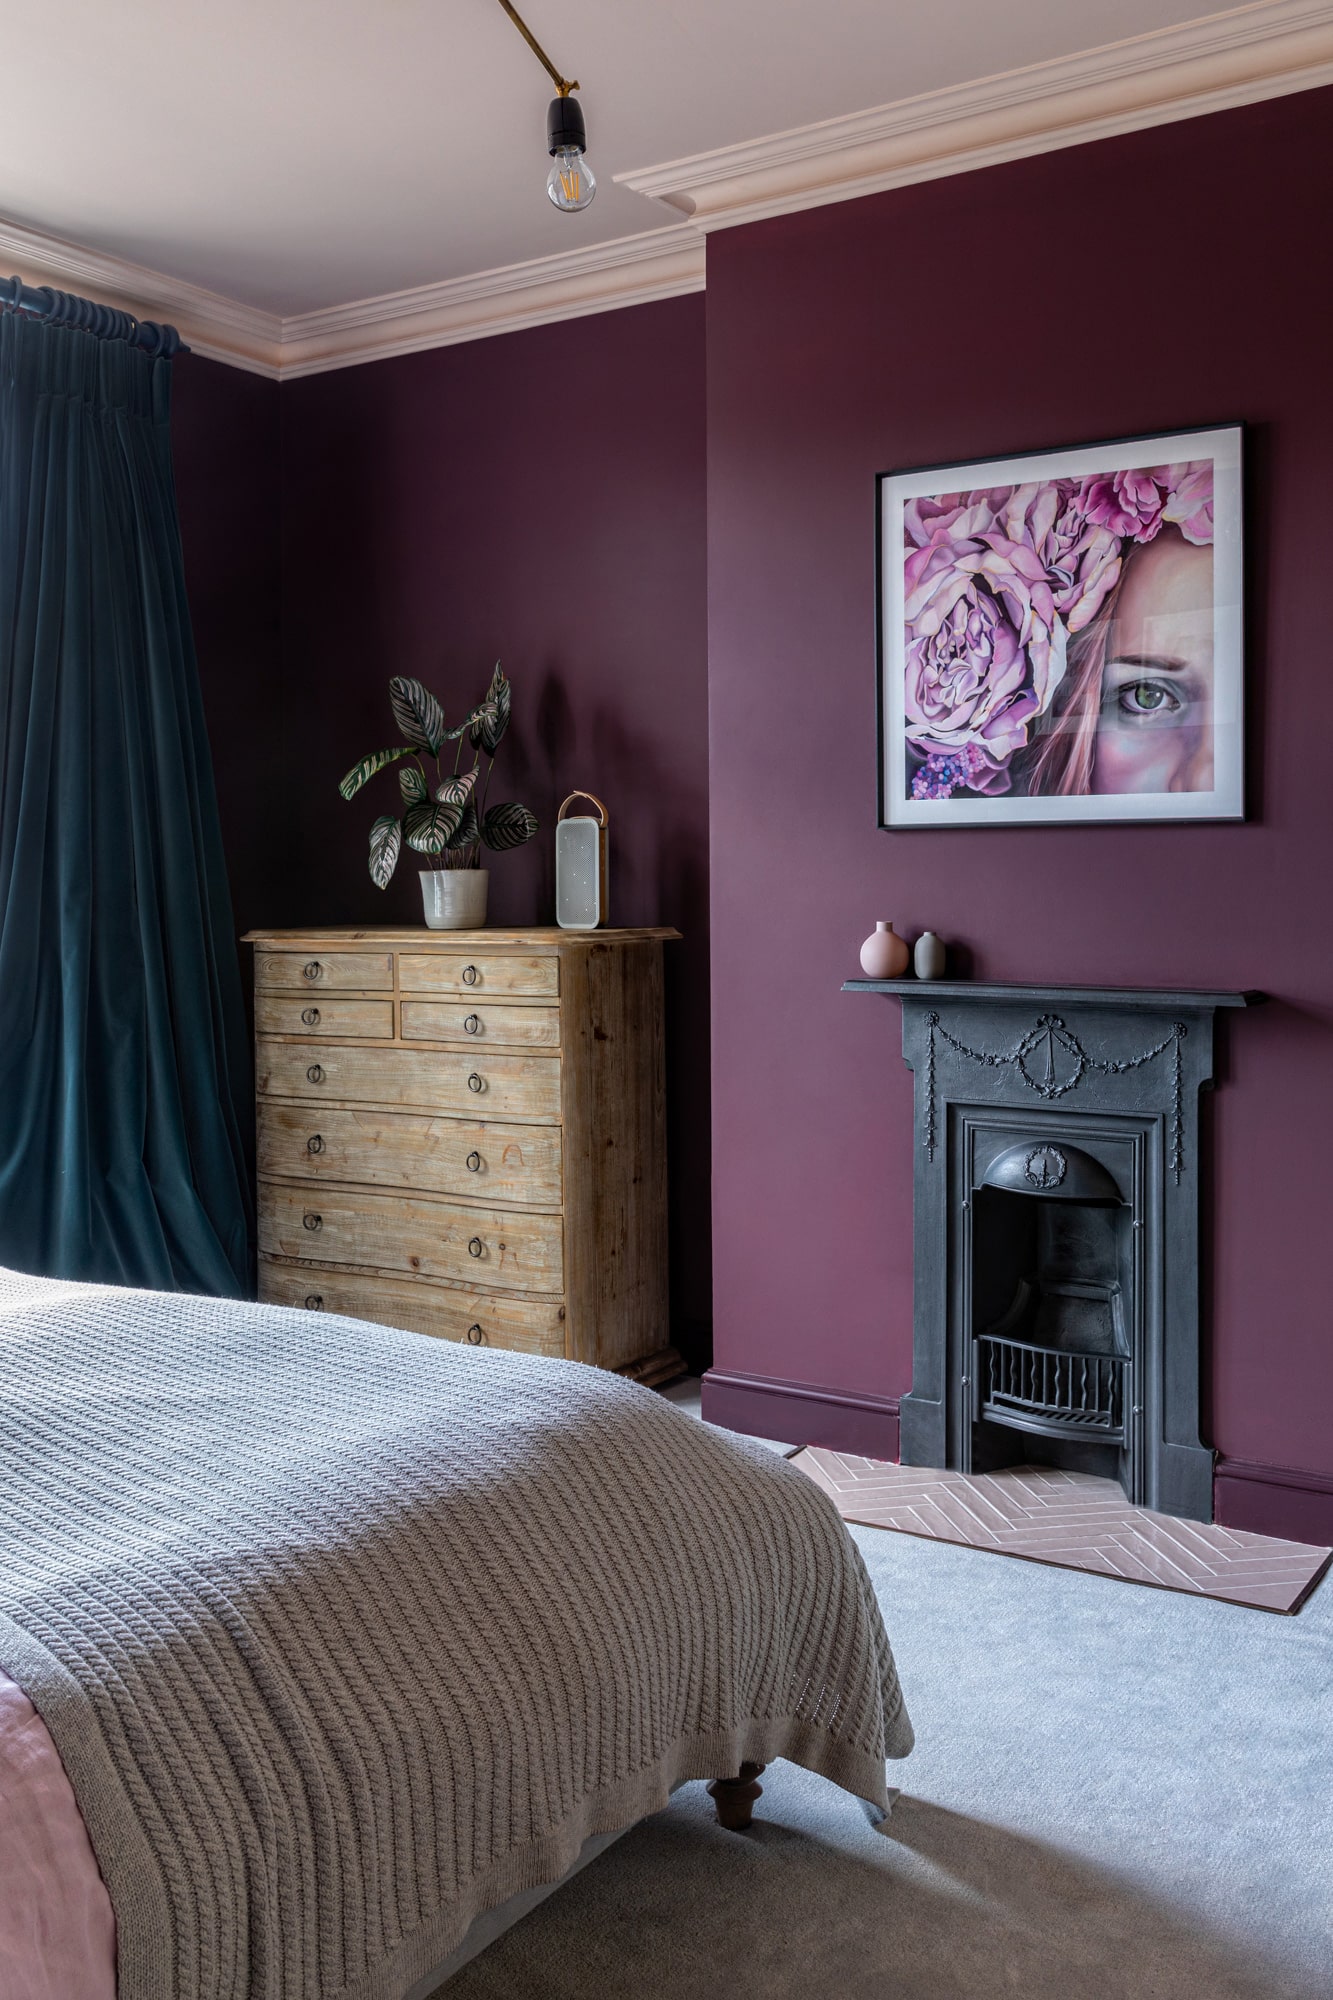 Interior design photography: bedroom with dark burgundy walls;  art with a girl in a flower band; fireplace; teal velvet curtains; bed; wooden chest of drawers